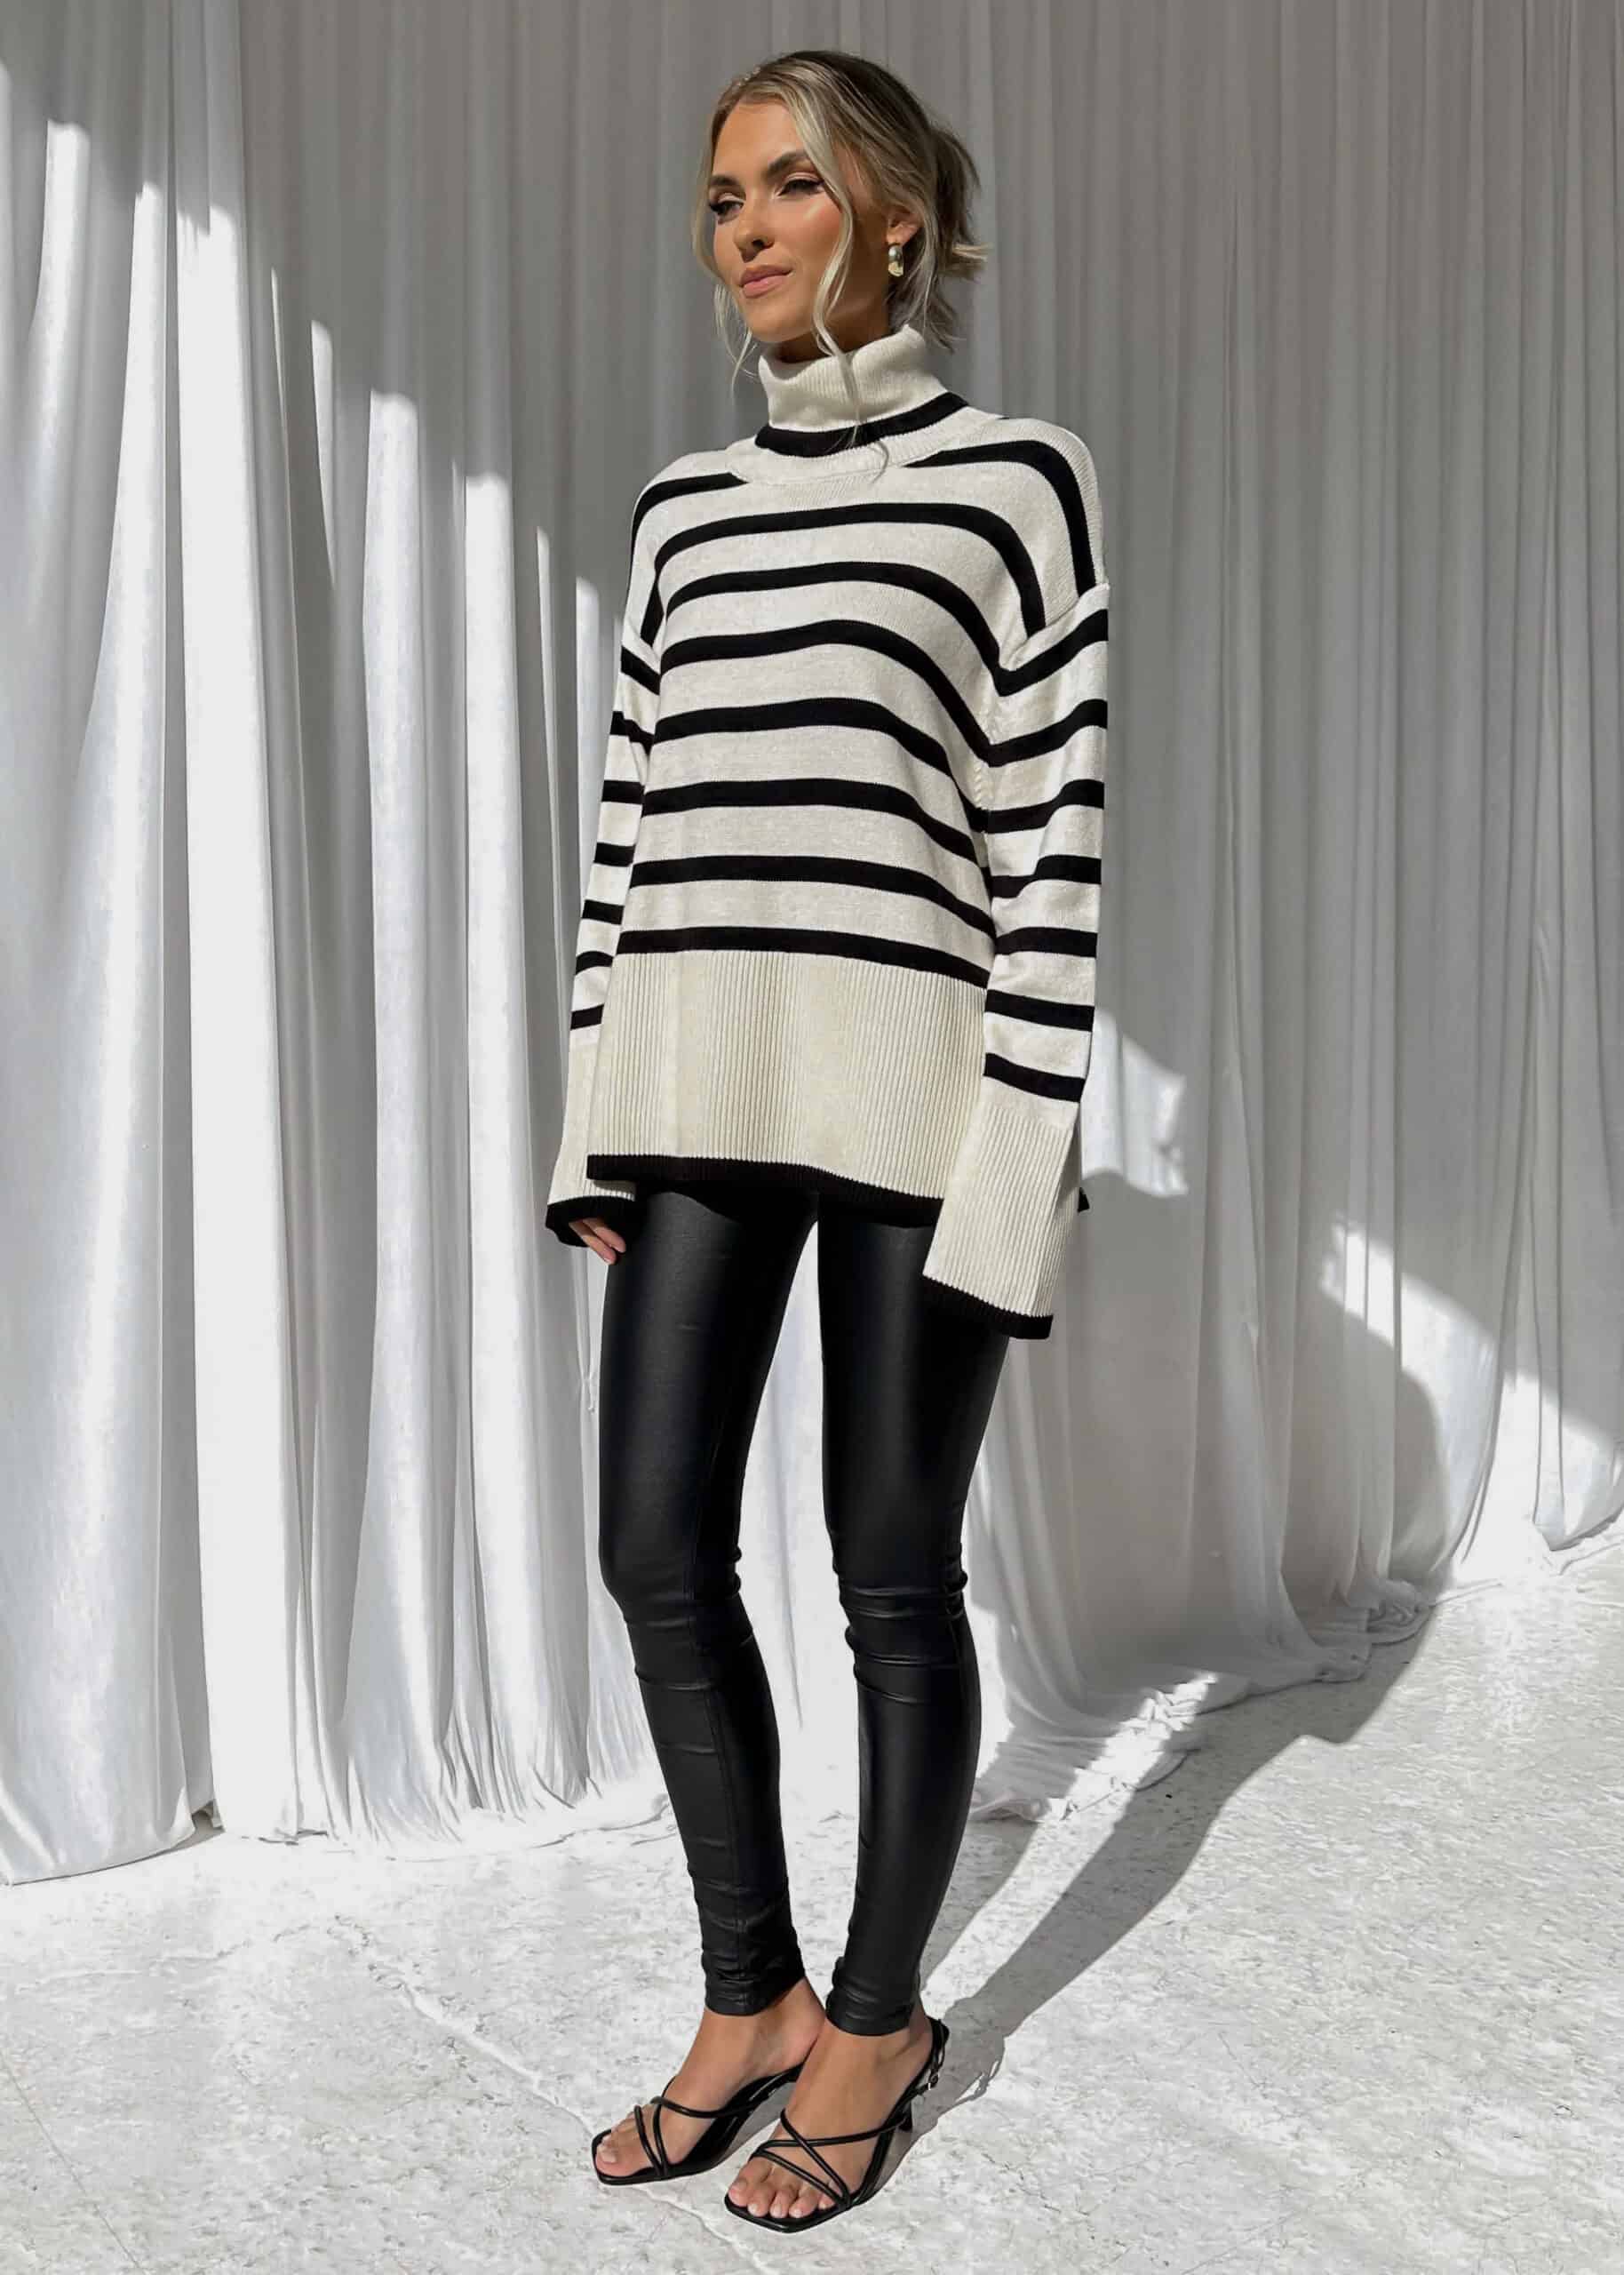 woman wearing an oversized striped sweater with leather leggings and heels